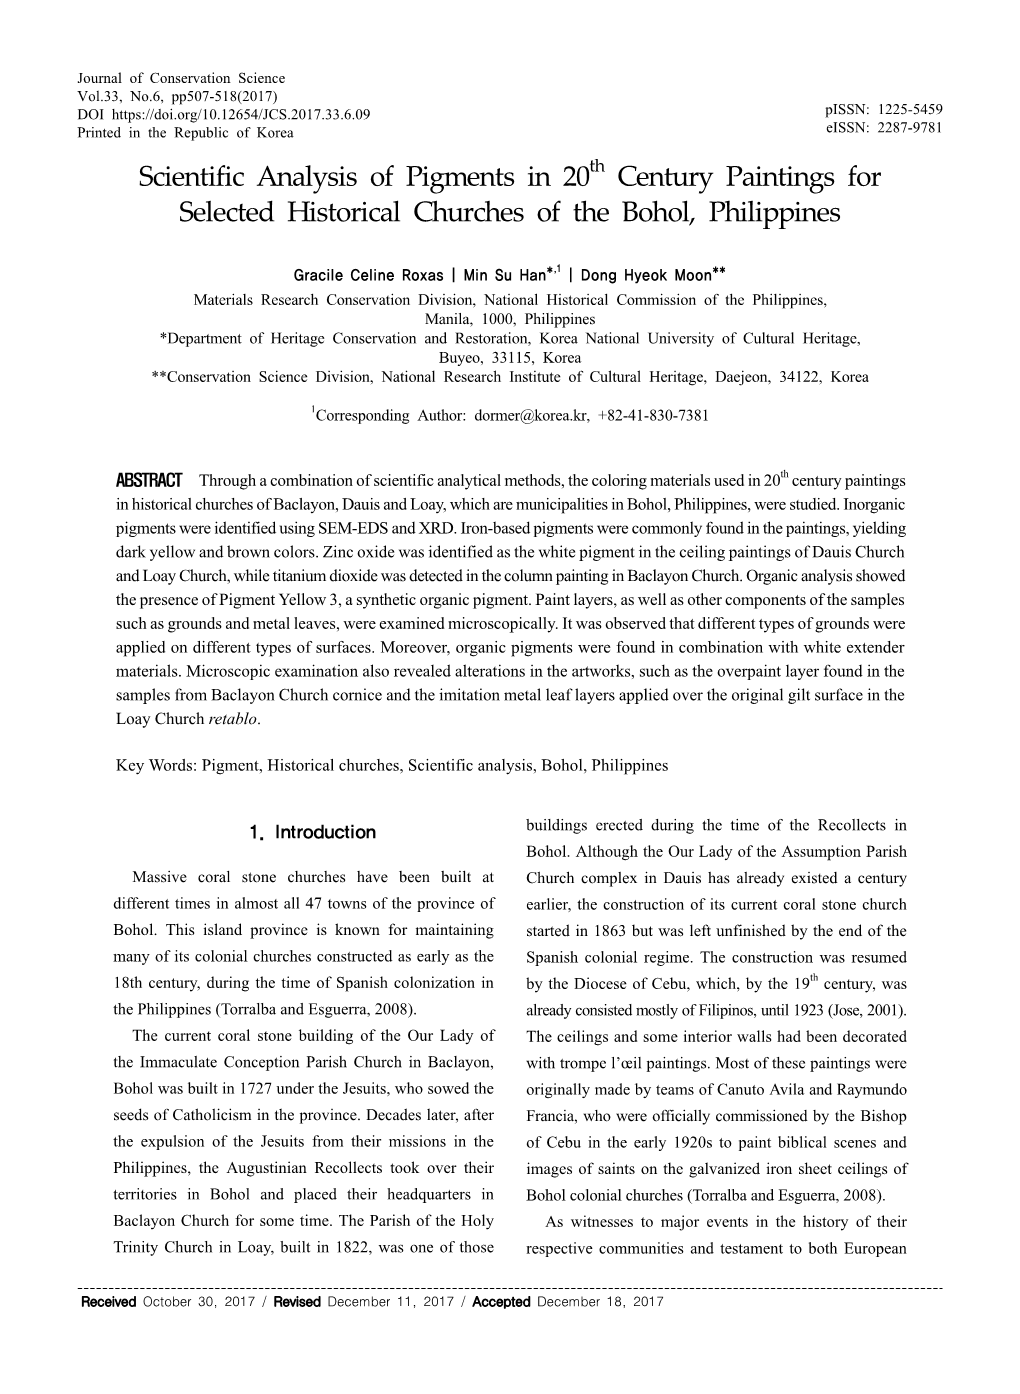 Scientific Analysis of Pigments in 20 Century Paintings for Selected Historical Churches of the Bohol